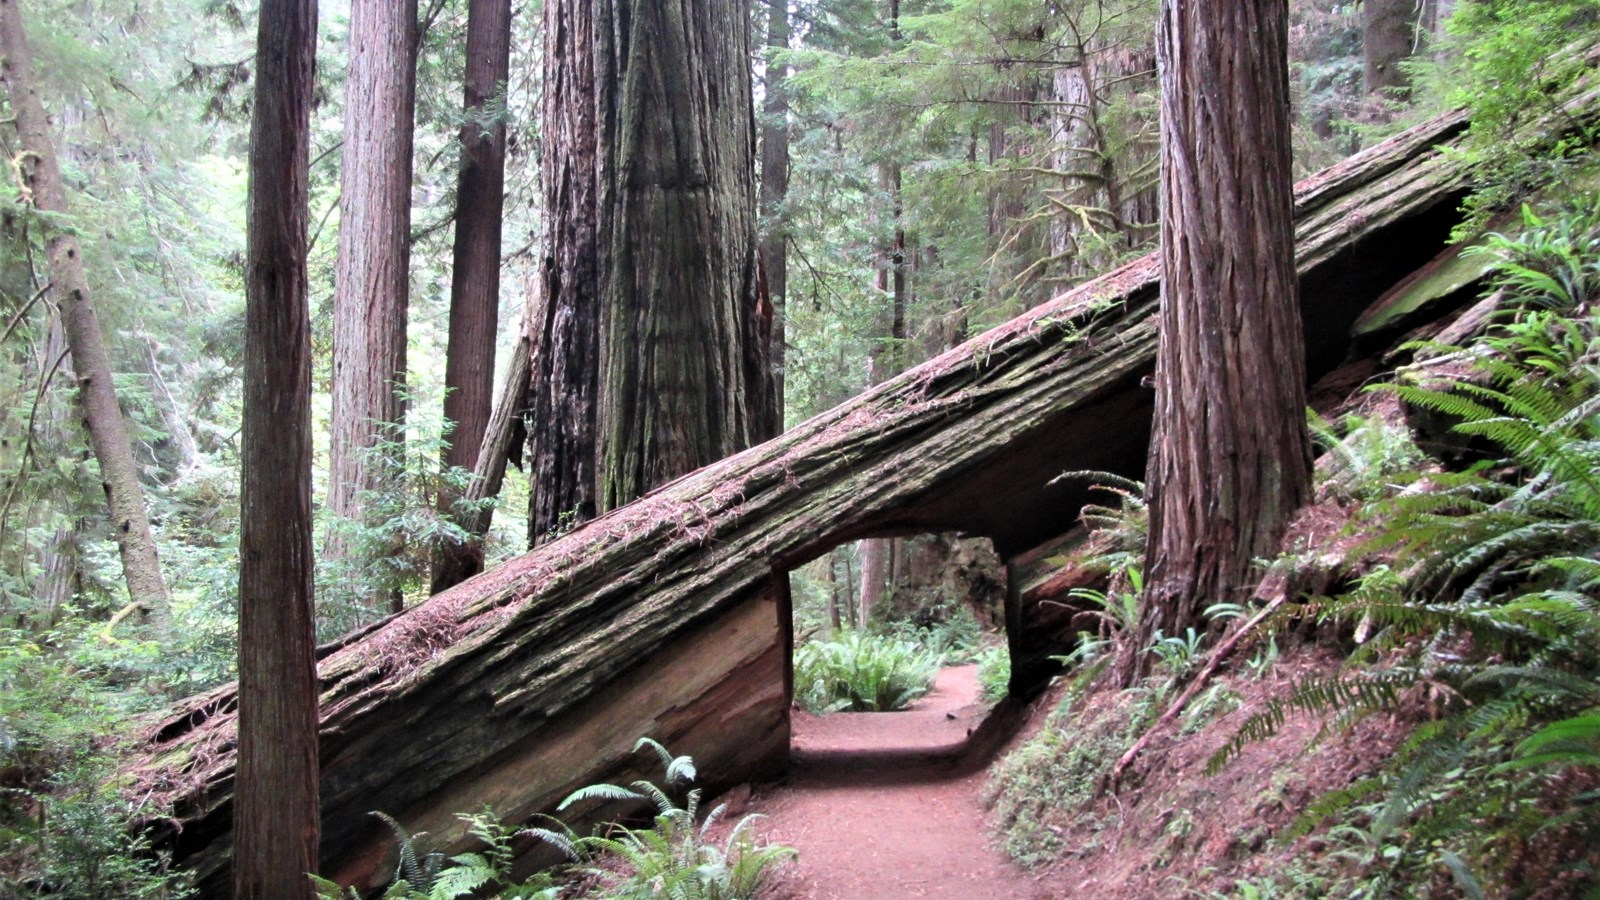 A large redwood lies on a slope. It is cut so a trail passes underneath it.